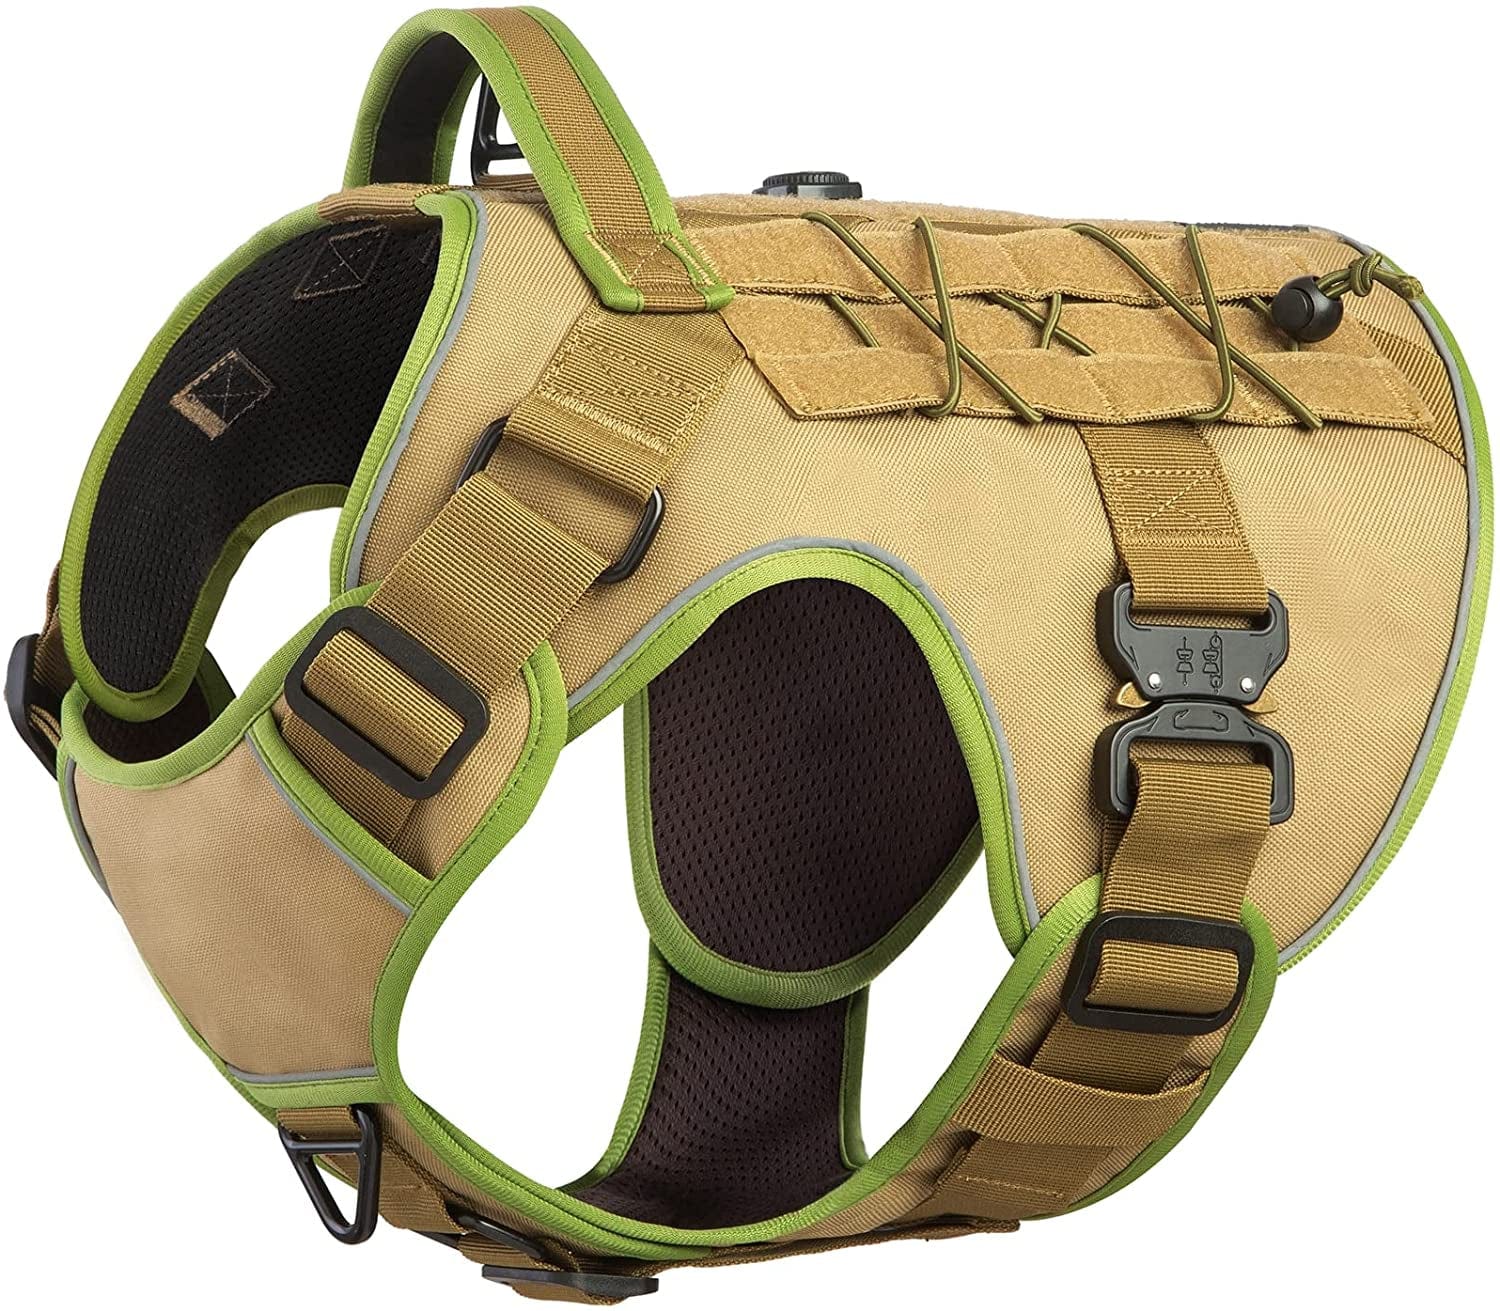 DNALLRINO Tactical Dog Harness for Large Medium Dogs, Heavy Duty Military Dog Harness with Handle, Adjustable No Pull Service Dog Harness with Molle & Loop Panels for Hiking Walking Training Animals & Pet Supplies > Pet Supplies > Dog Supplies > Dog Apparel Dnallrino Brown XL (Neck: 21" - 29", Chest: 30"-43") 